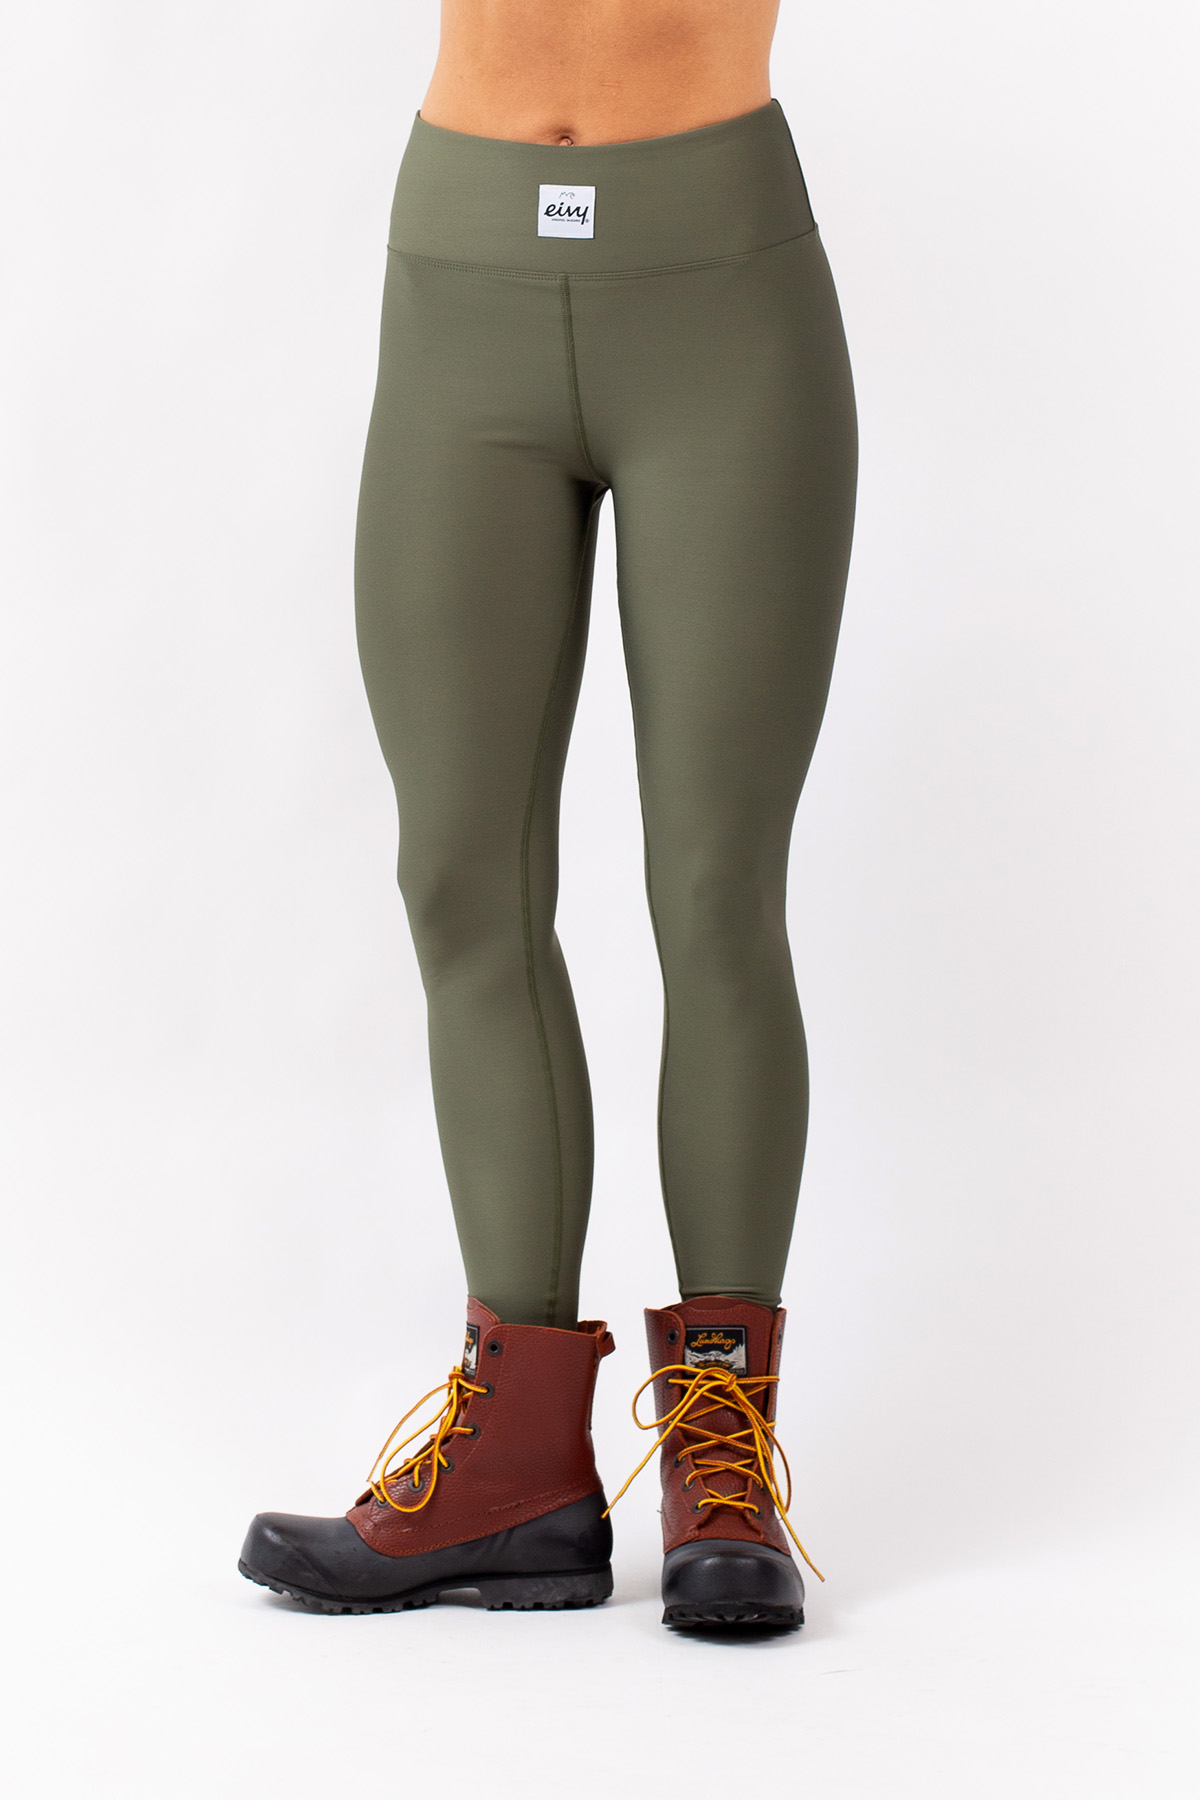 Underställ | Icecold Tights - Forest Green